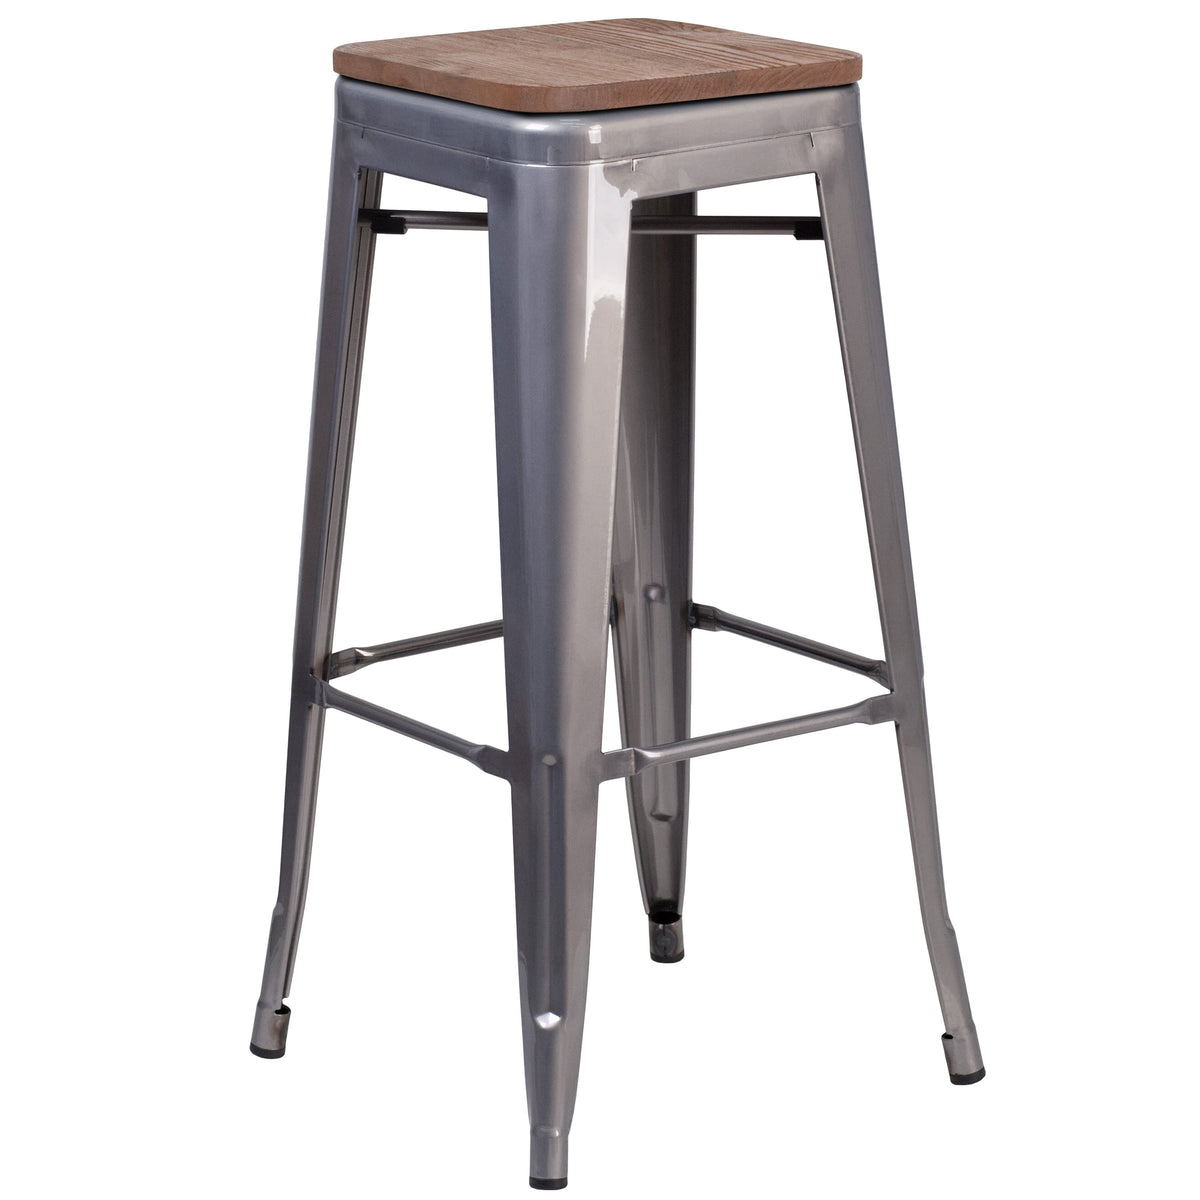 30inch High Backless Clear Coated Metal Barstool with Square Wood Seat